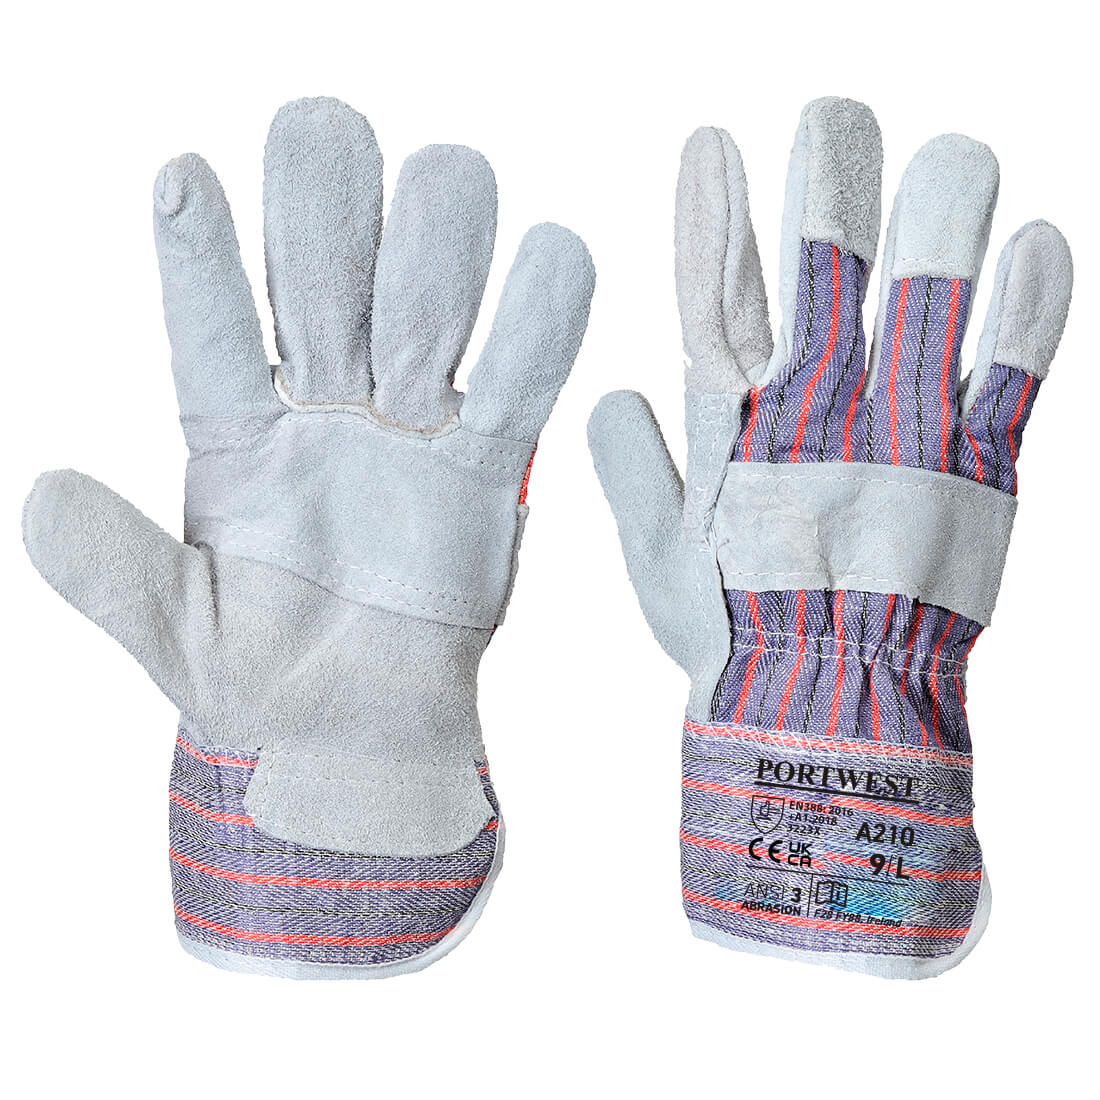 A210 - Classic Canadian Rigger Glove Grey